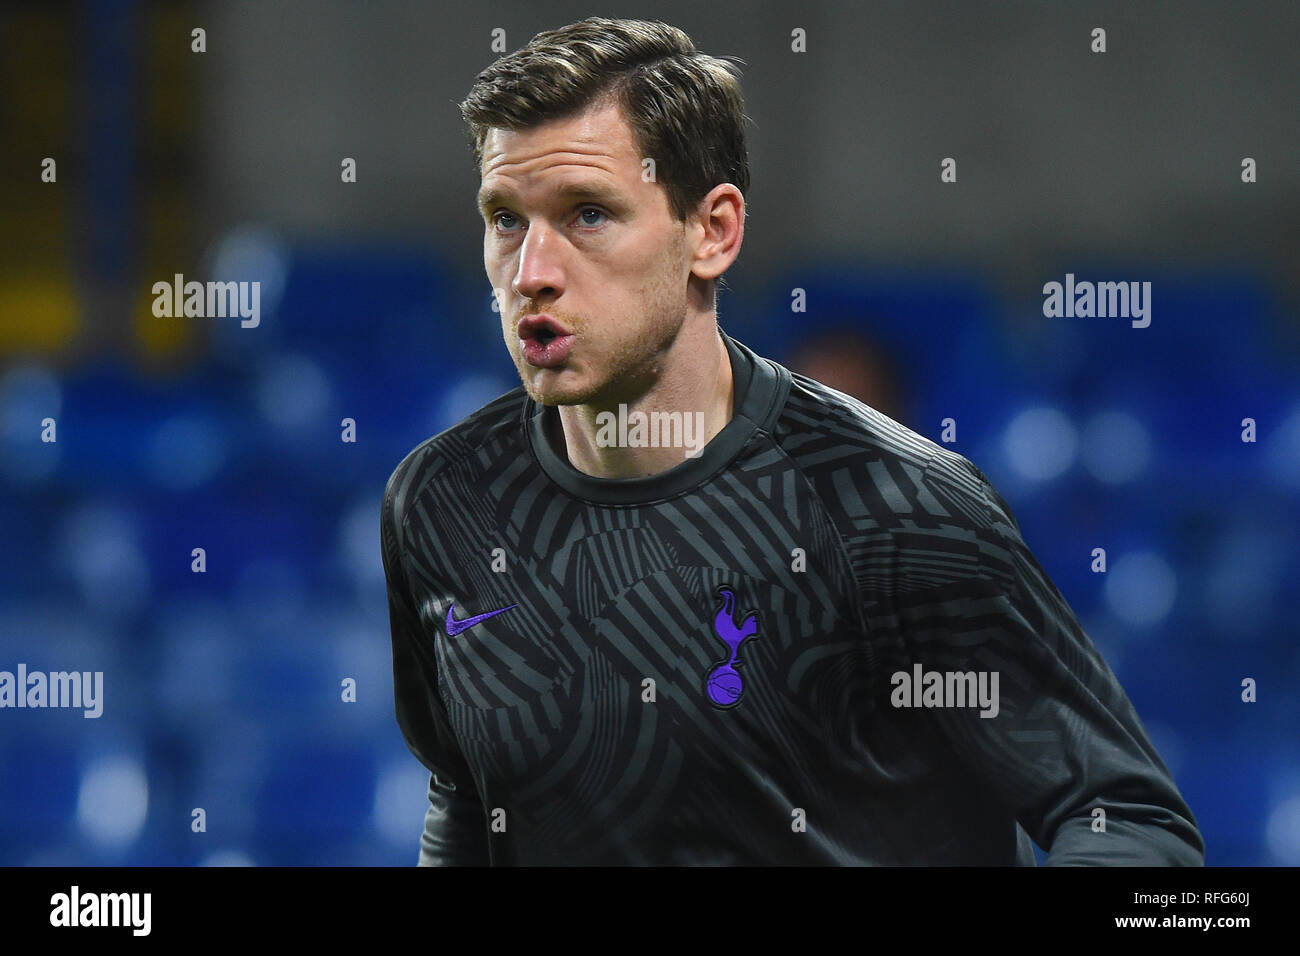 LONDON, UK 24 JANUARY Tottenham defender Jan Vertonghen captains the side during the Carabao Cup match between Chelsea and Tottenham Hotspur at Stamford Bridge, London on Thursday 24th January 2019. (Photo Credit: MI News & Sport) Stock Photo